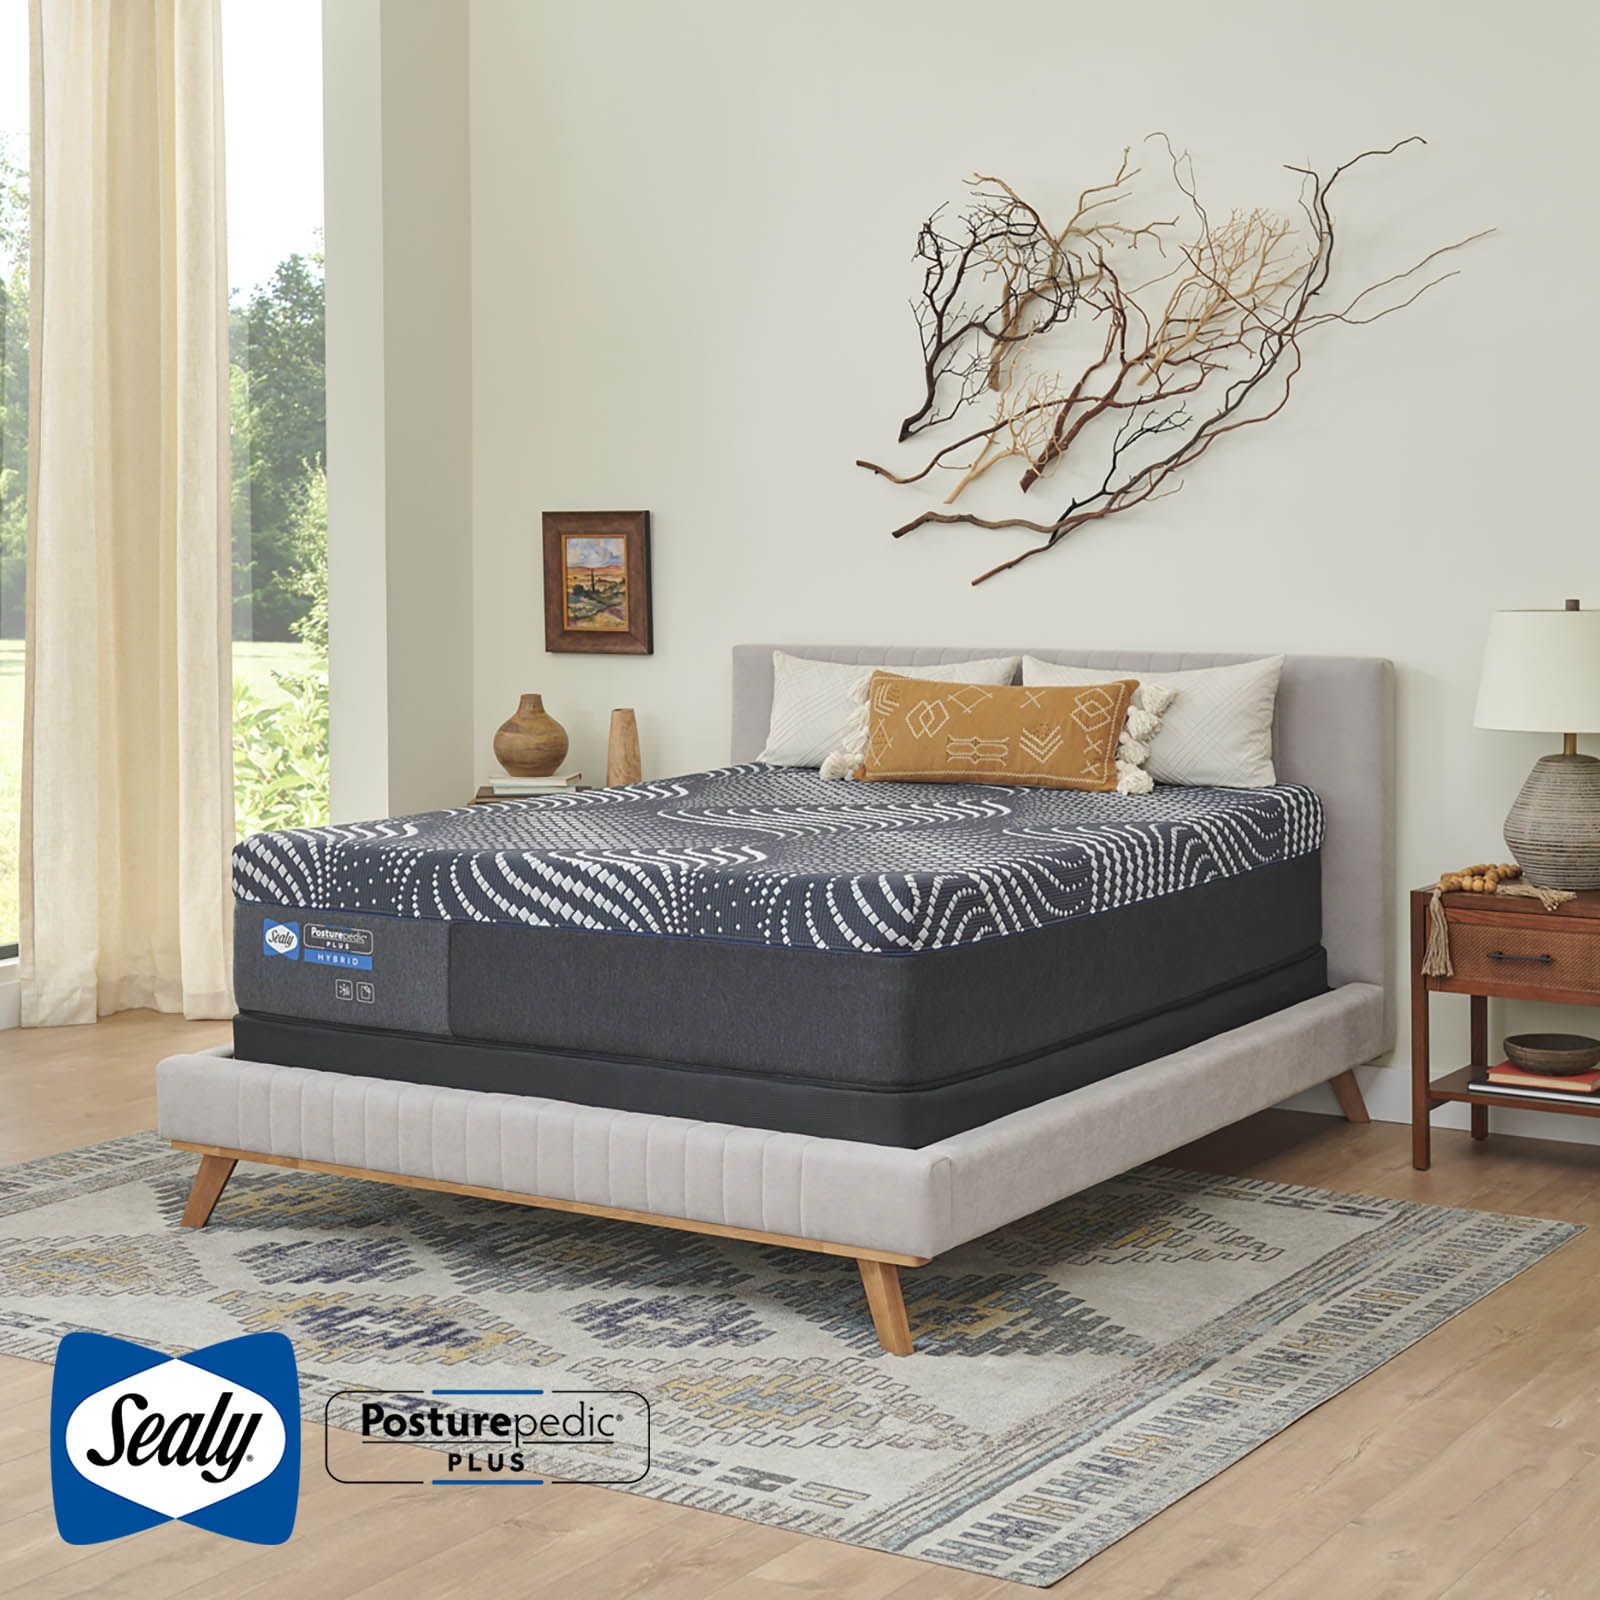 sealy mattress on bed in contemporary bedroom